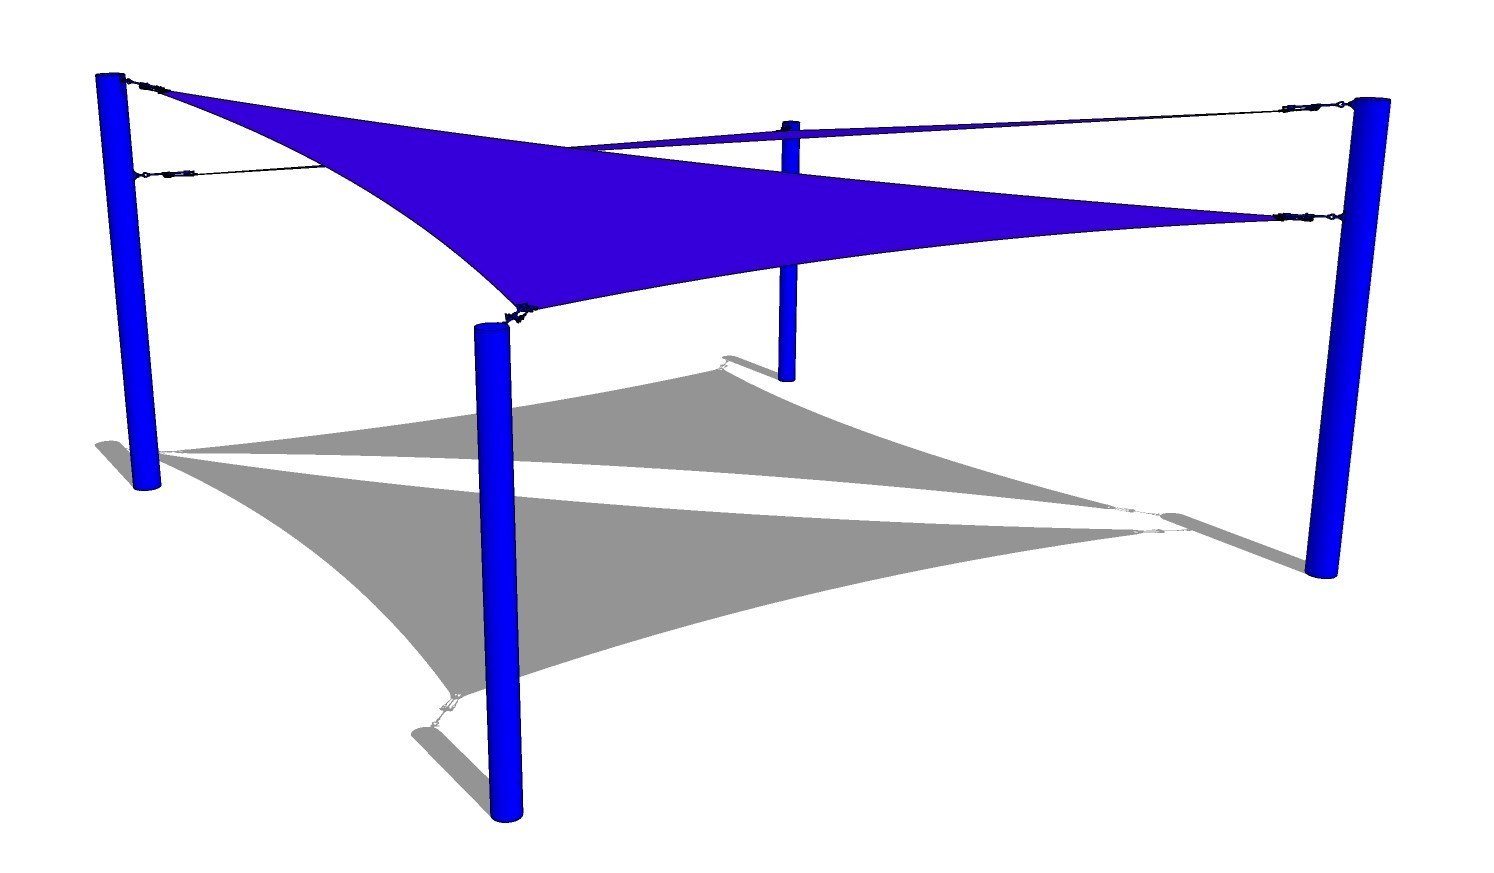 Fabric Structure: Dual Triangle Sails